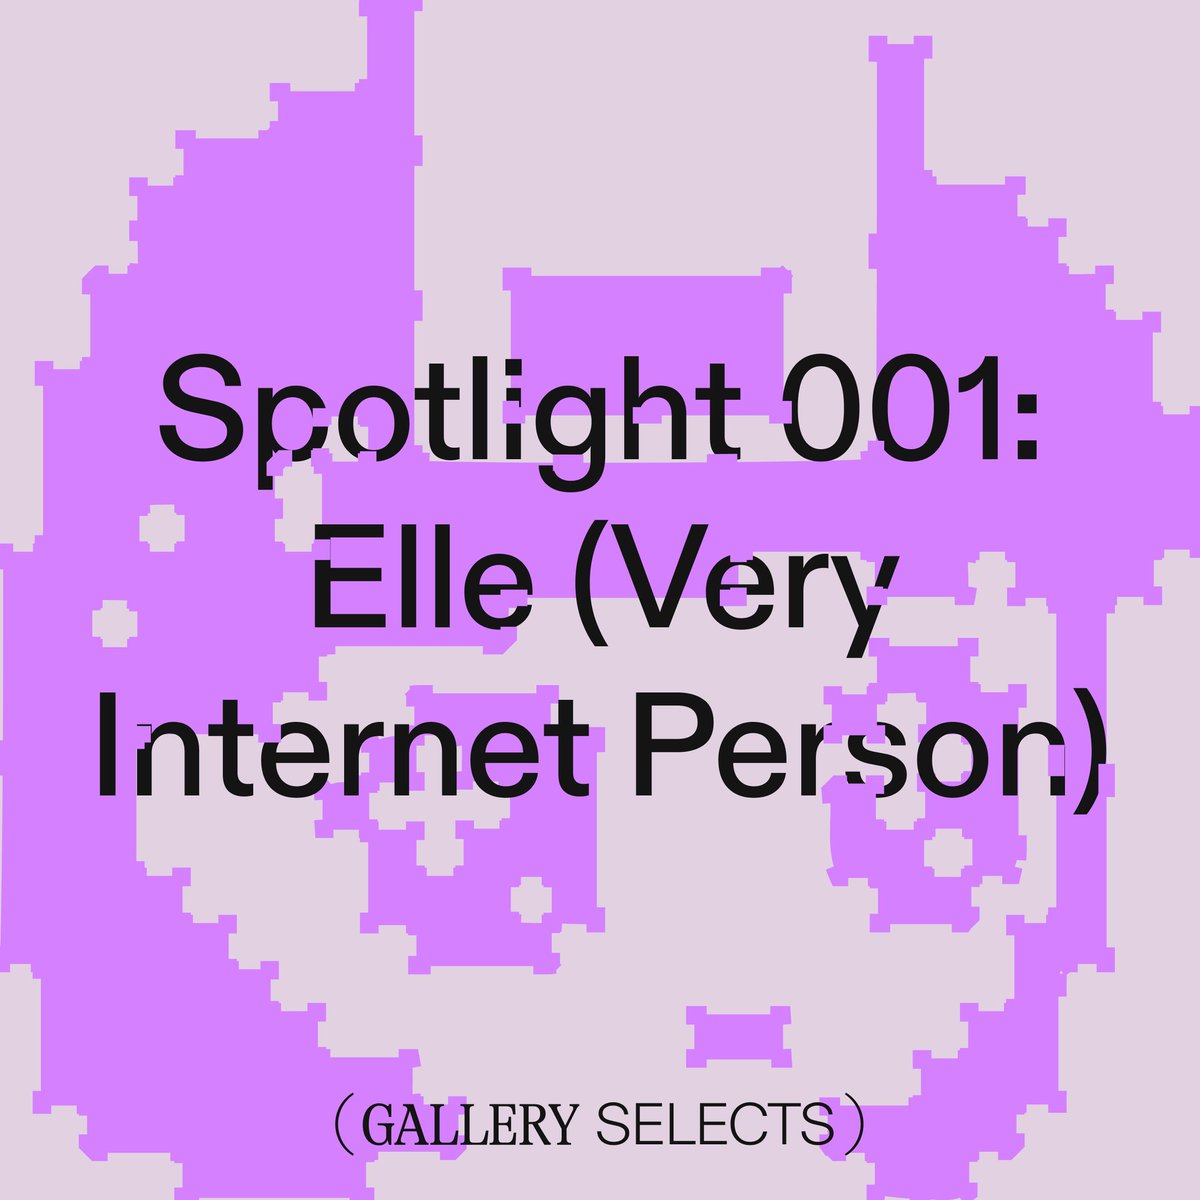 Today, Gallery kicks off our new editorial arm: Gallery Selects. We aim to highlight voices and perspectives across the creative landscape of Web3 with the goal of elevating art & creativity on the blockchain. Read on for our very first feature with @riotgoools 👇